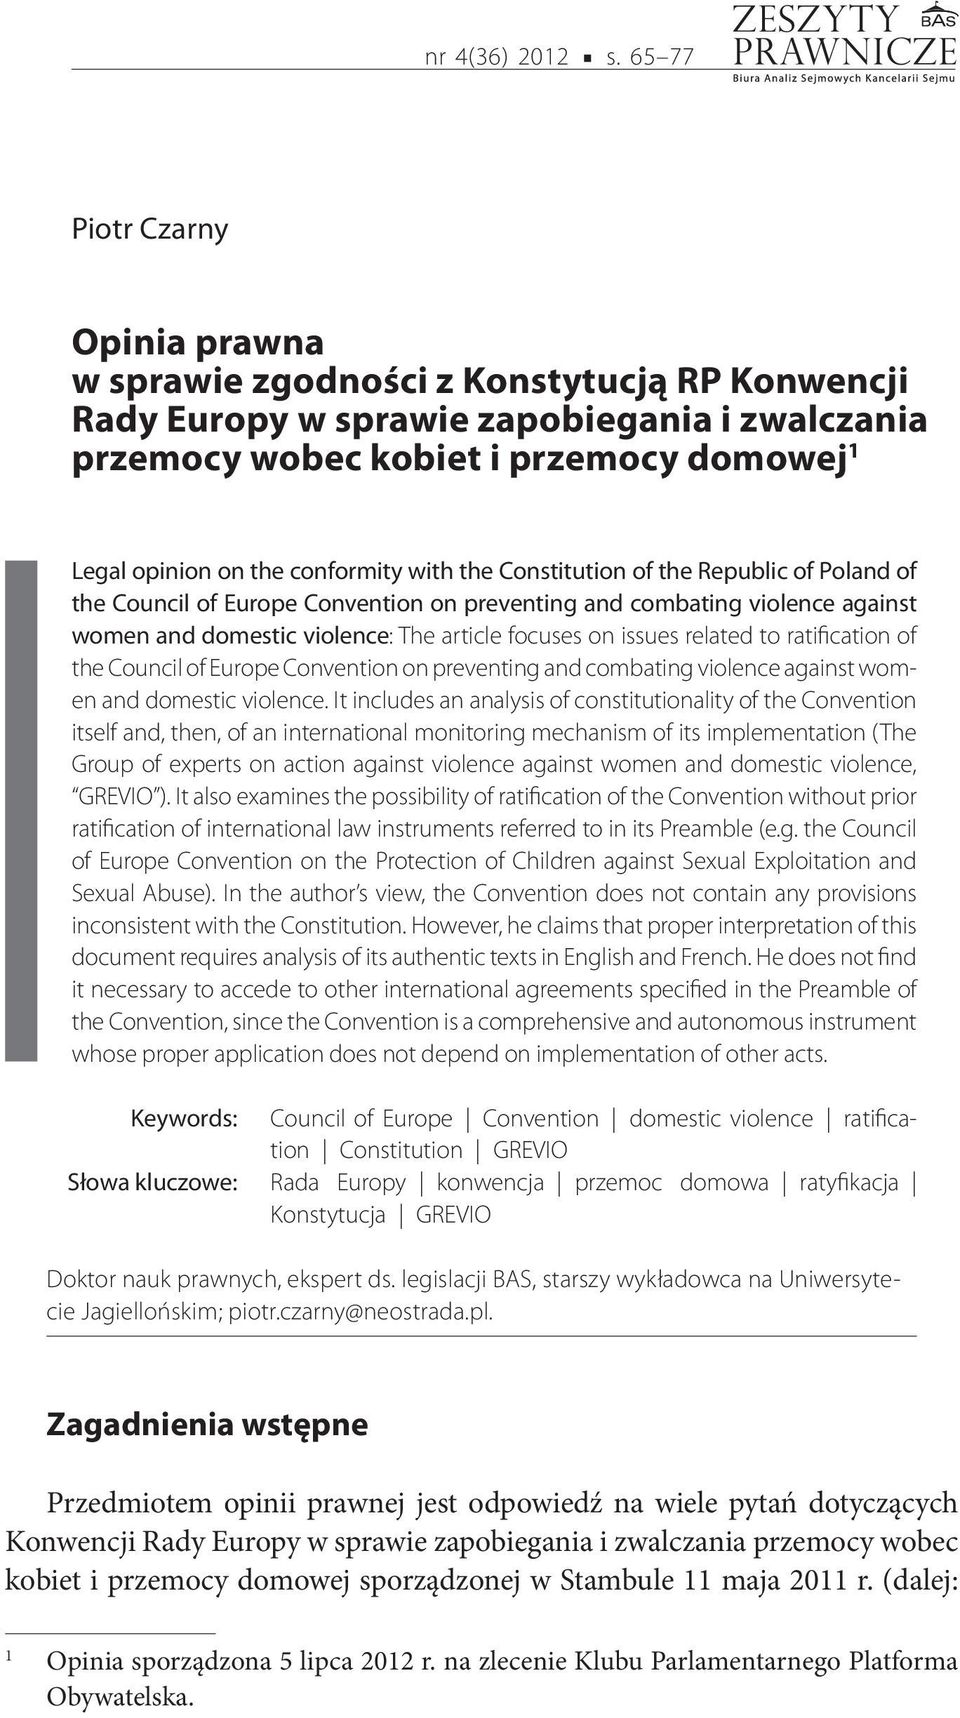 conformity with the Constitution of the Republic of Poland of the Council of Europe Convention on preventing and combating violence against women and domestic violence: The article focuses on issues